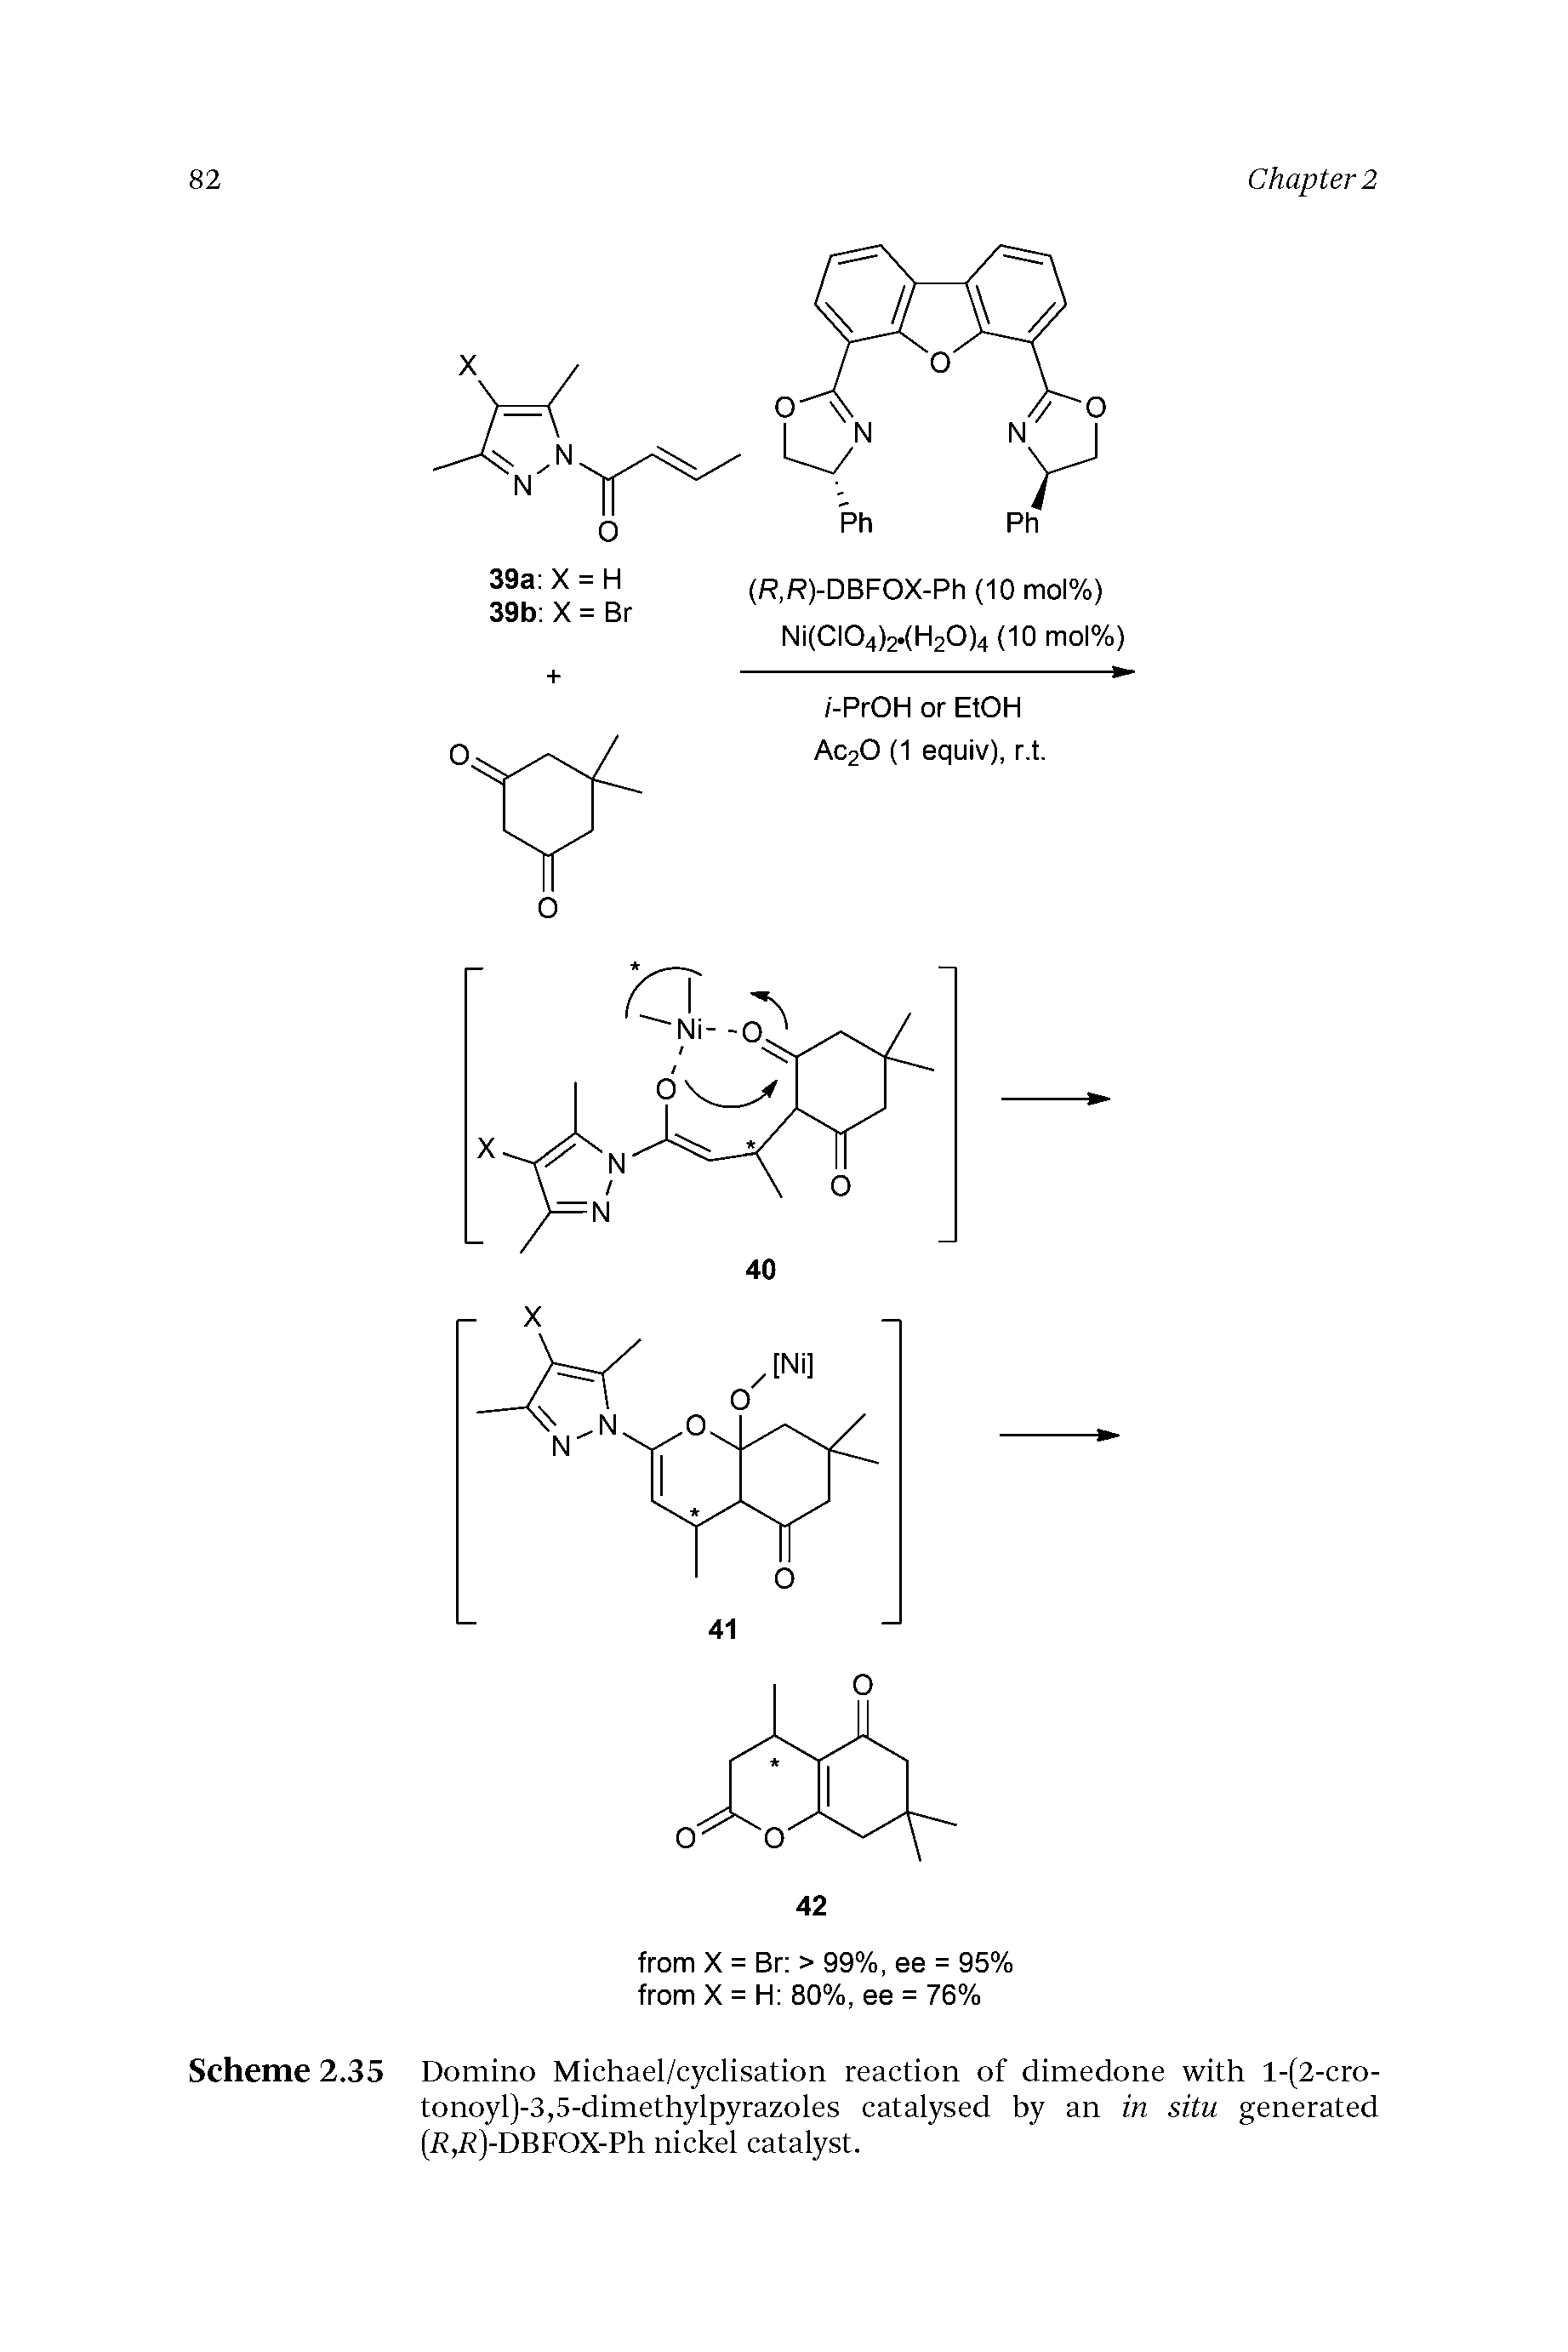 Scheme 2.35 Domino Michael/cyclisation reaction of dimedone with l-(2-cro-tonoyl)-3,5-dimethylpyrazoles catalysed by an in situ generated (i ,i )-DBFOX-Ph nickel catalyst.